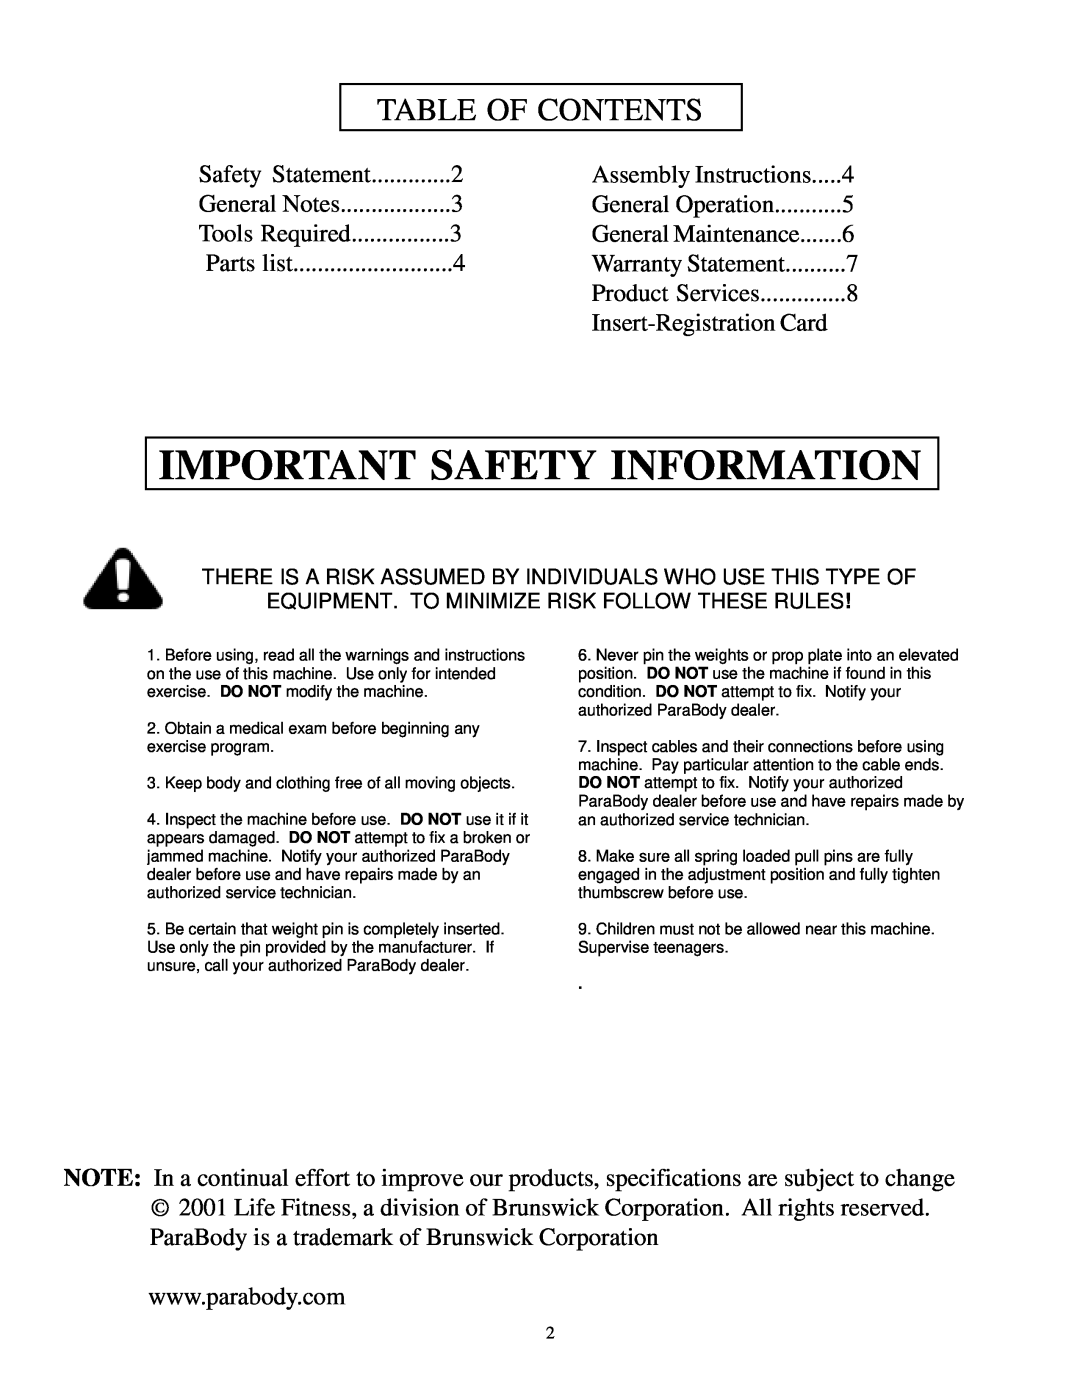 Life Fitness 824 manual Important Safety Information, Table Of Contents, Assembly Instructions, General Operation 